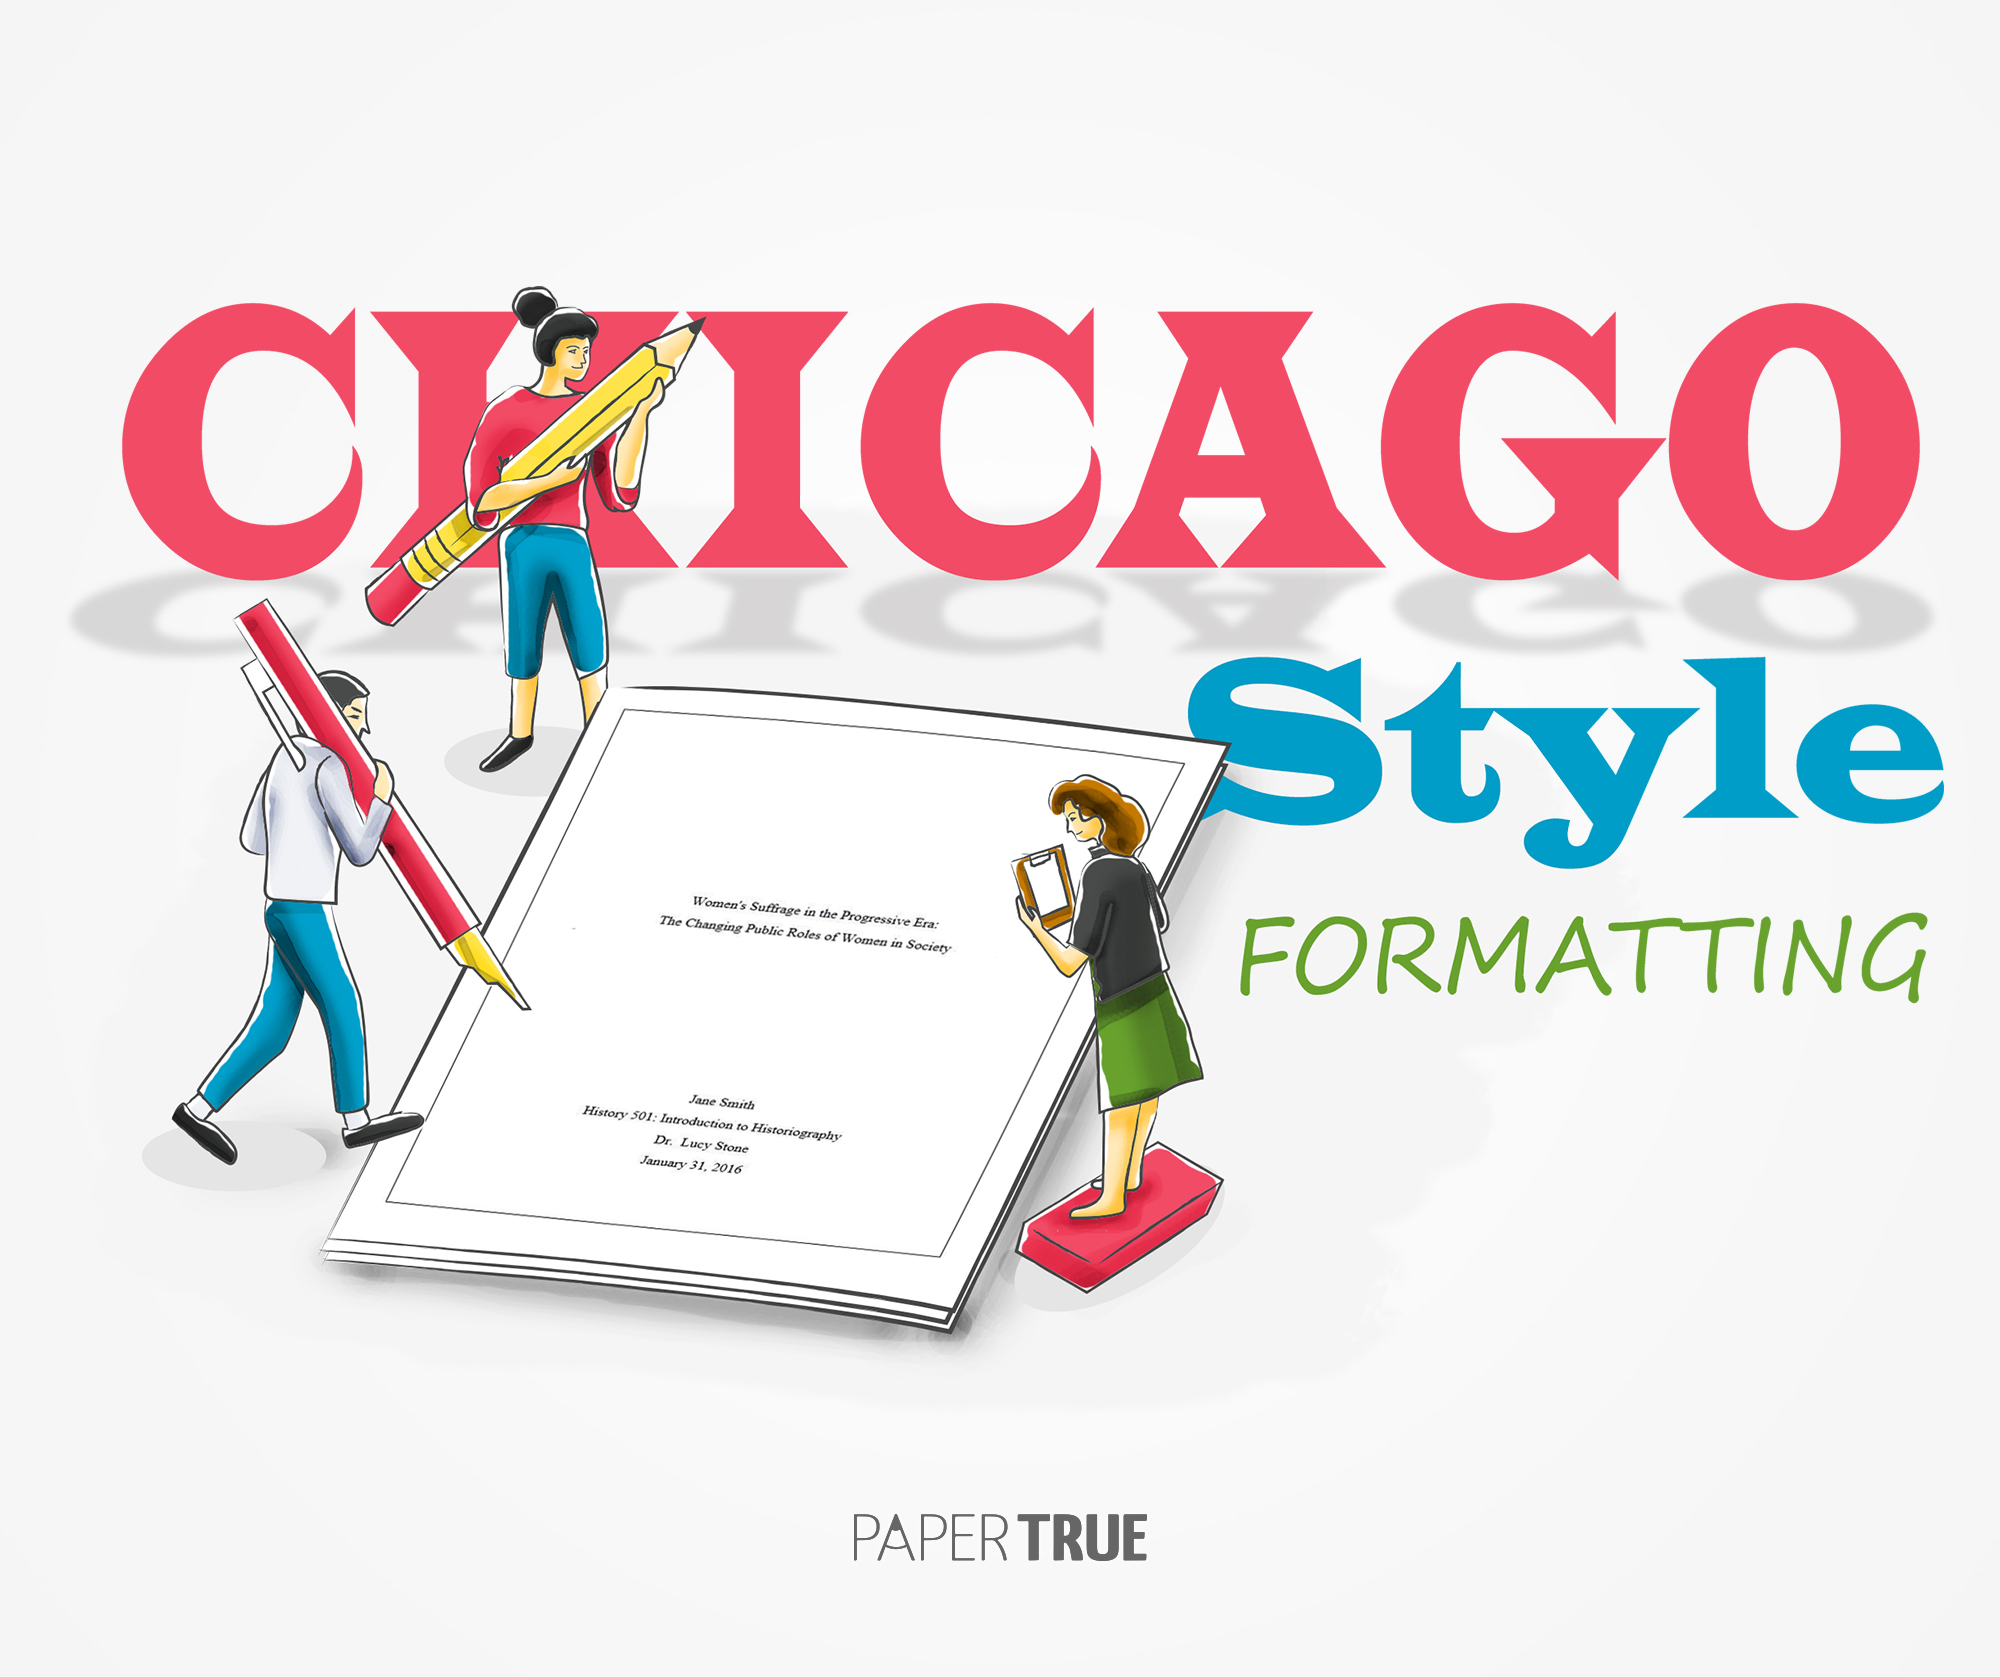 Chicago style for papers